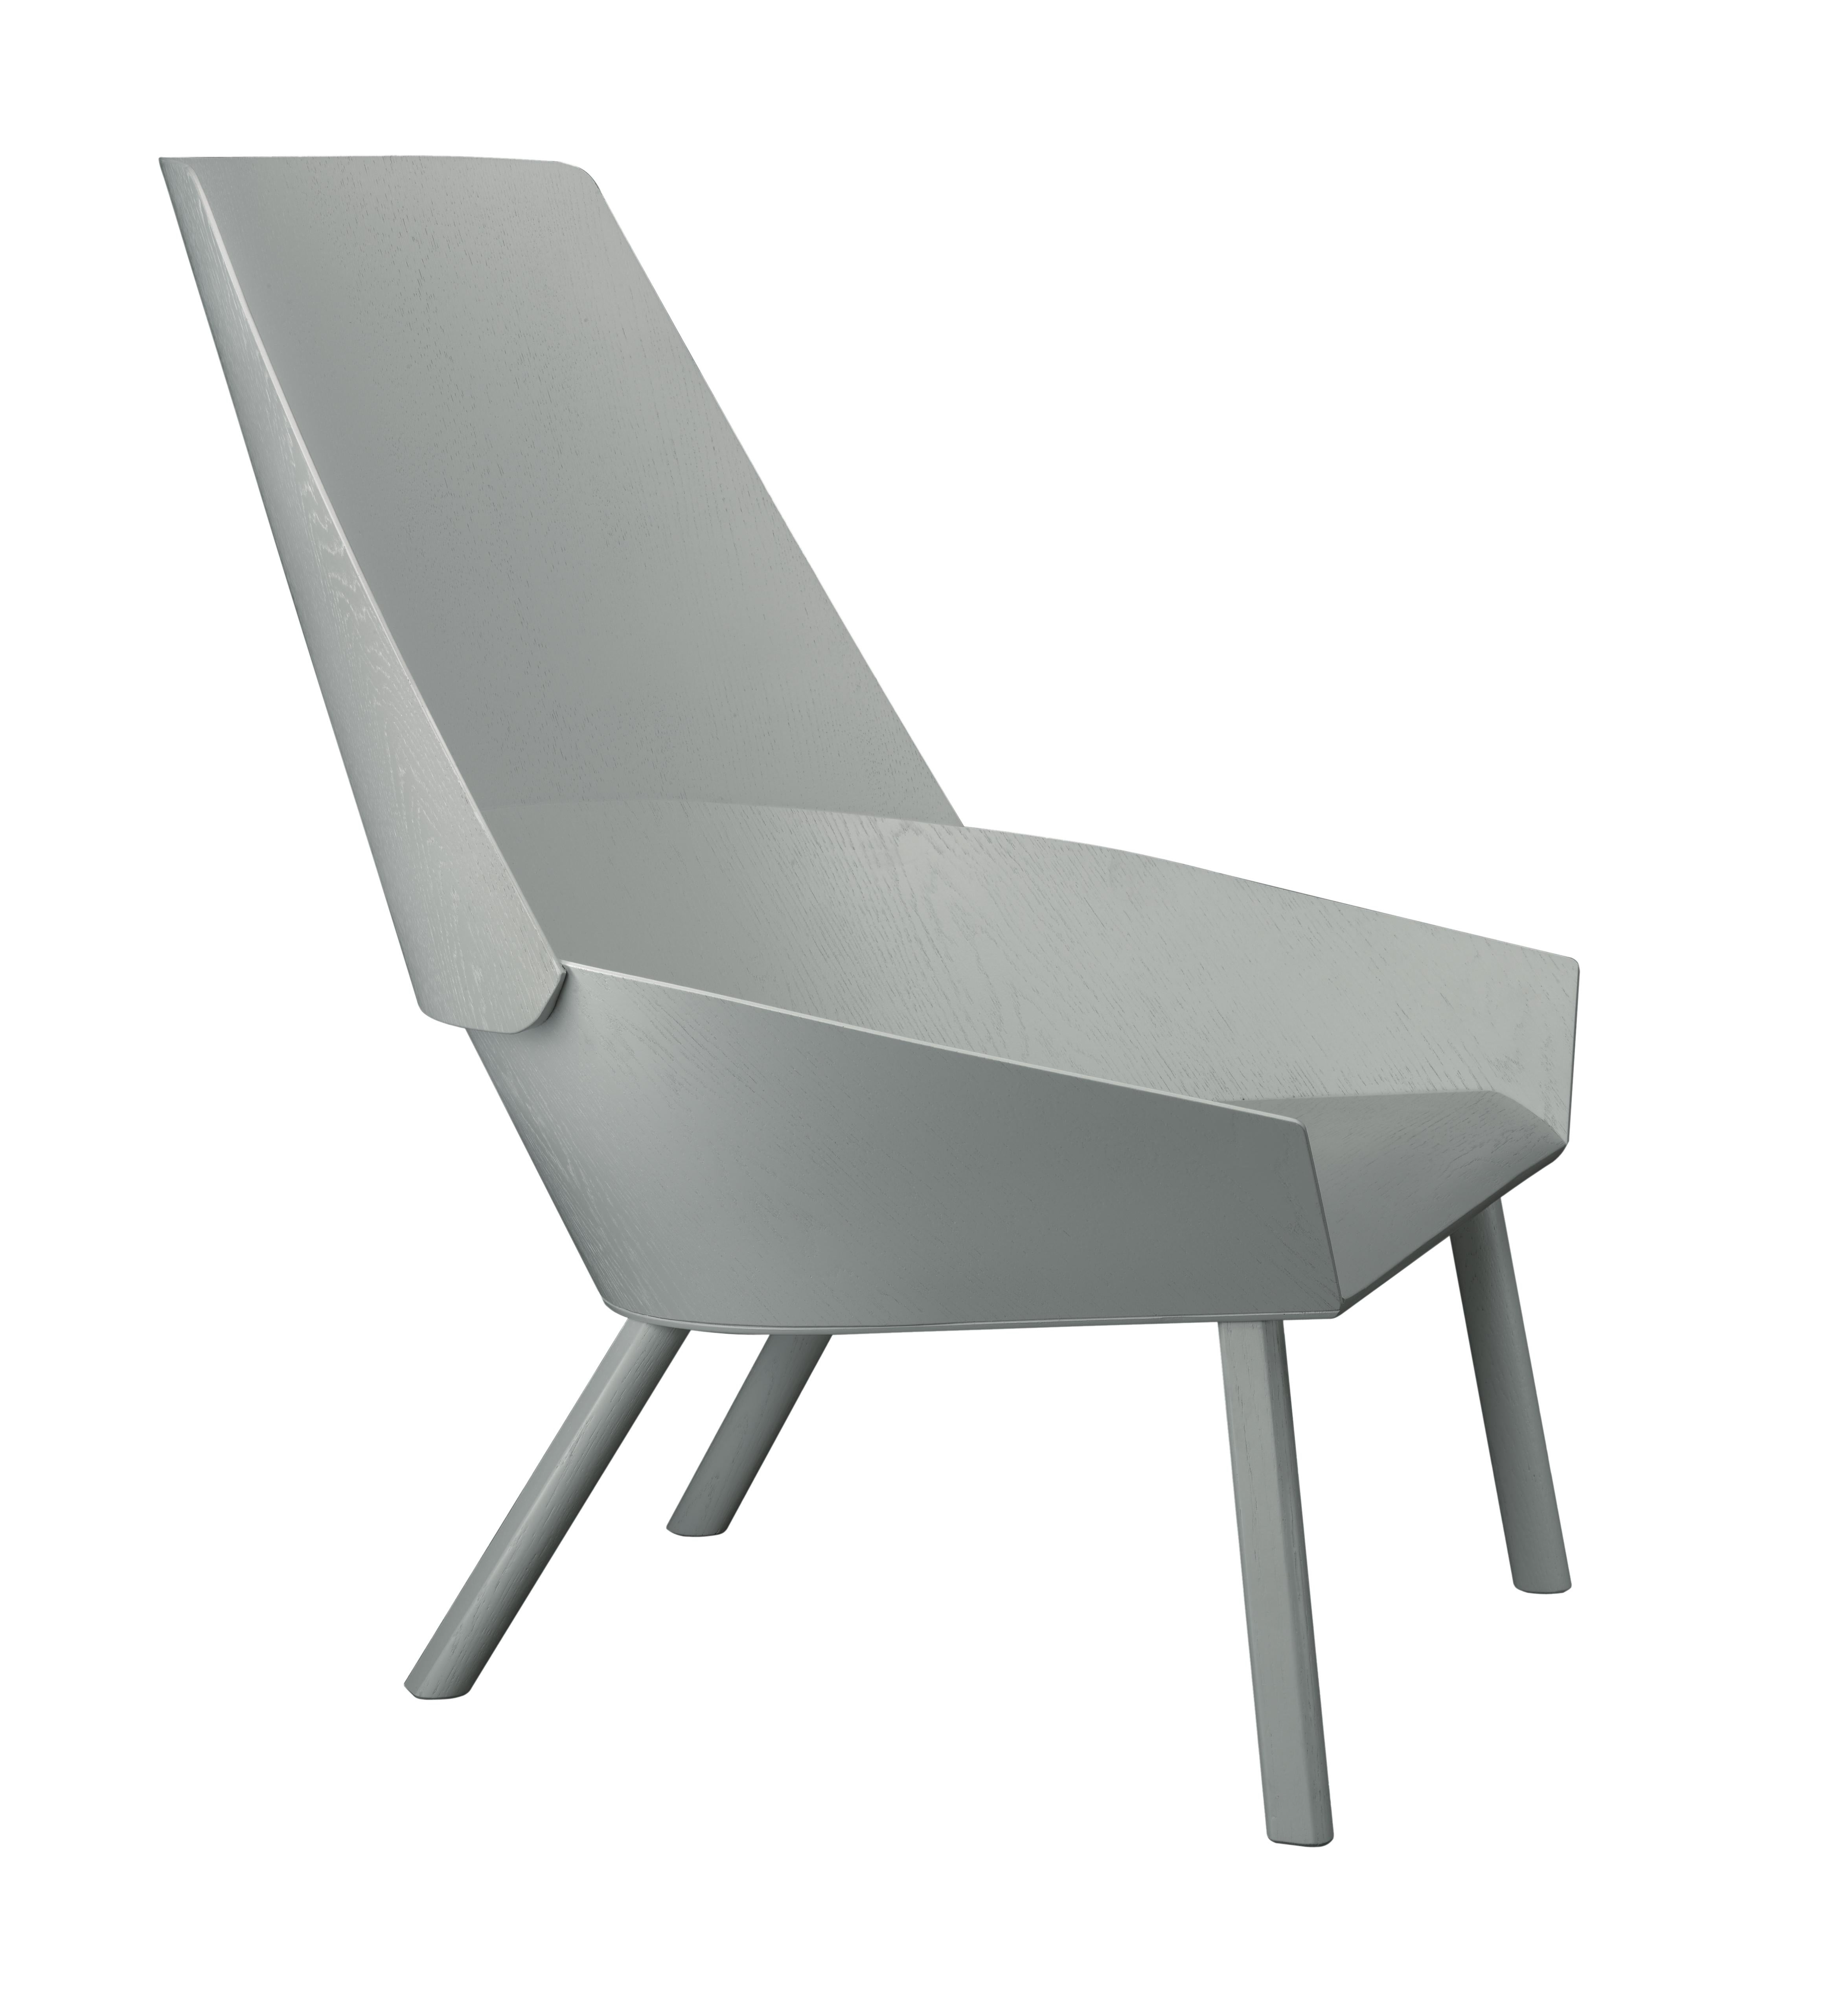 For Sale: Gray (Traffic Gray Lacquer) Customizable e15 Eugene Lounge Chair with Oak Base by Stefan Diez